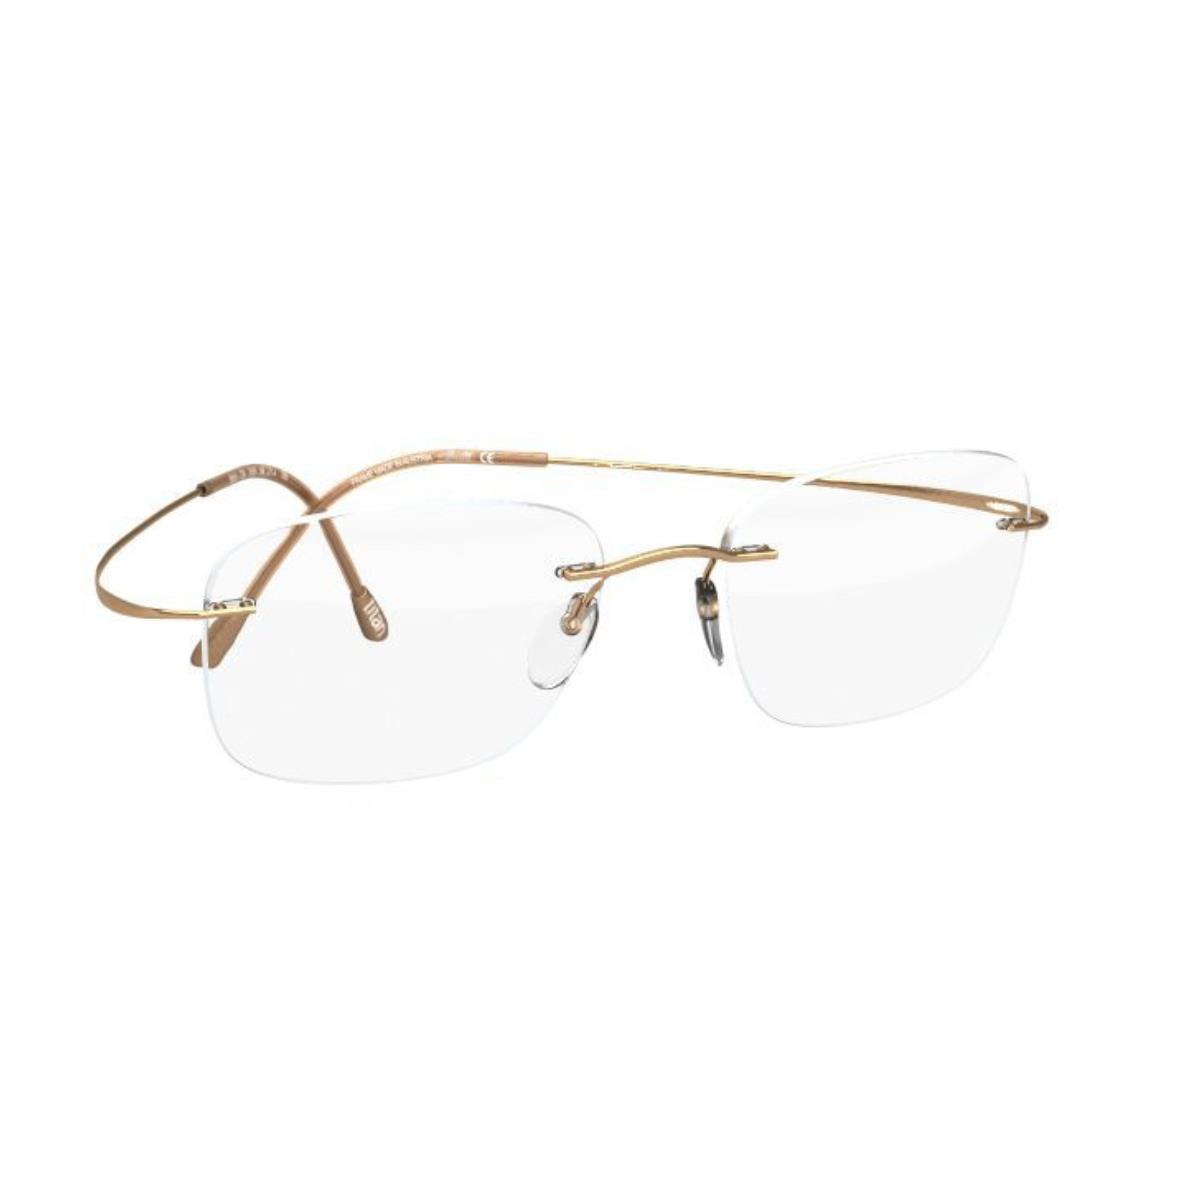 Silhouette 5515 Rimless Eyeglasses Titan Minimal Art The Must Collection Frames TRUE GOLD - 7530, SIZE: 54-21 160, SHAPE - CR